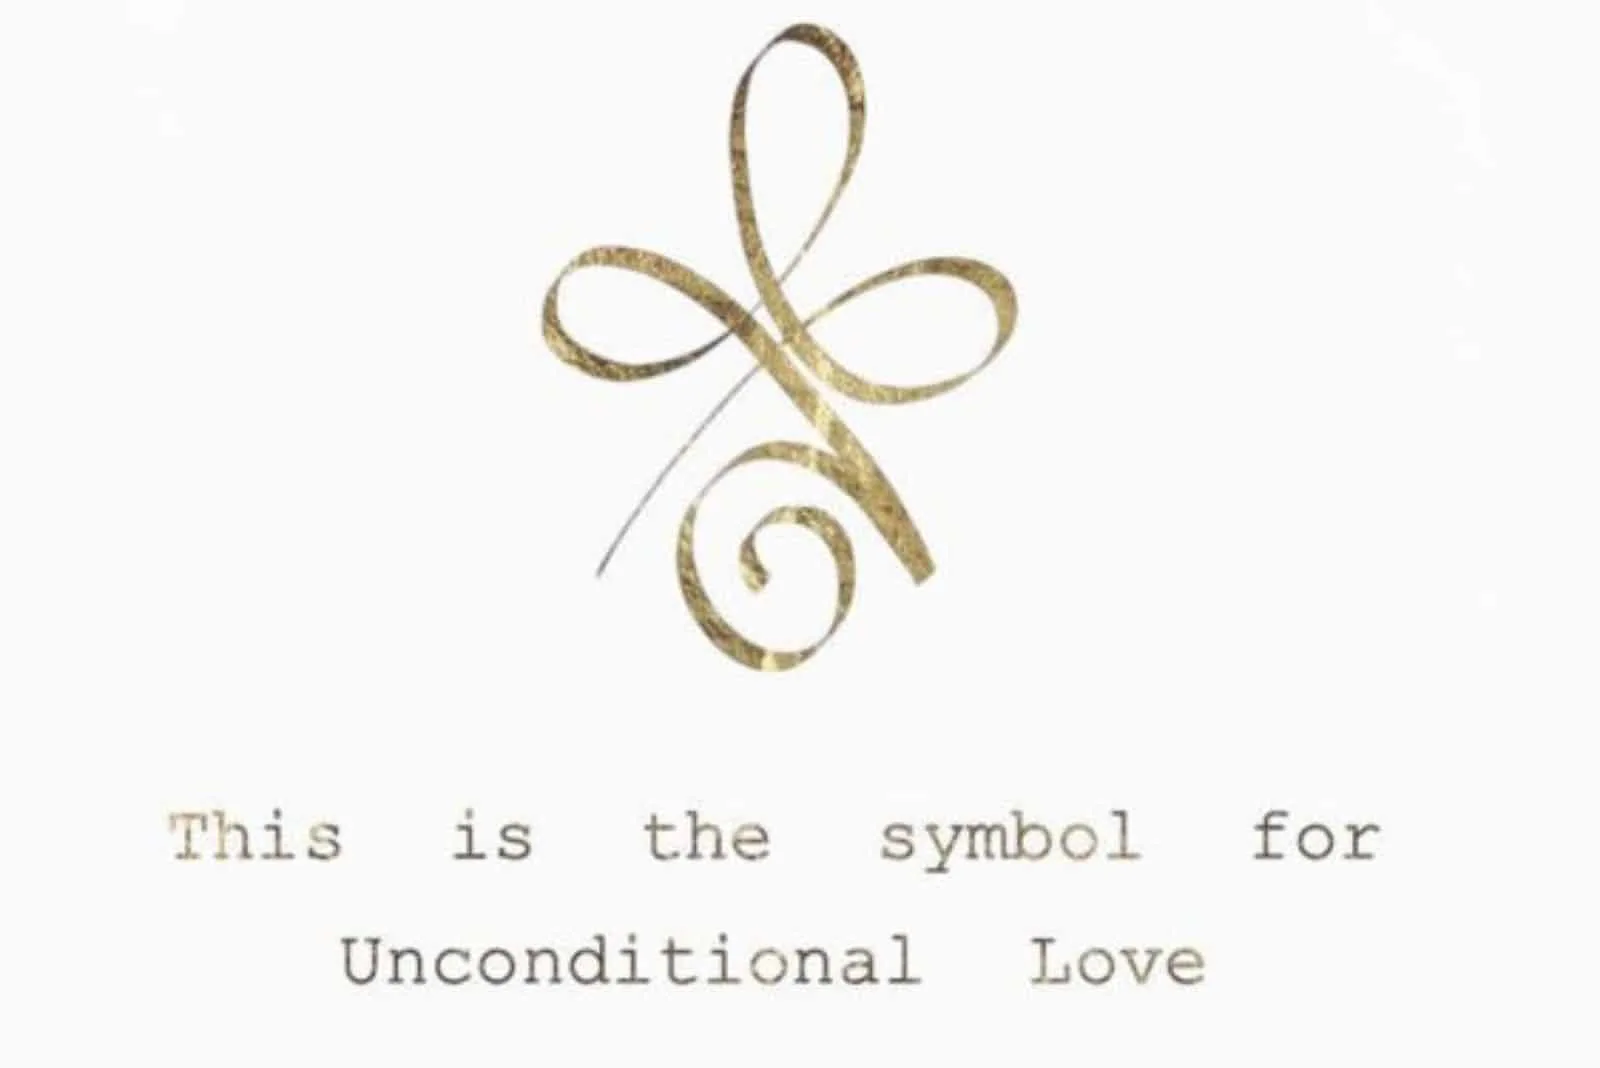 a symbol of unconditional love